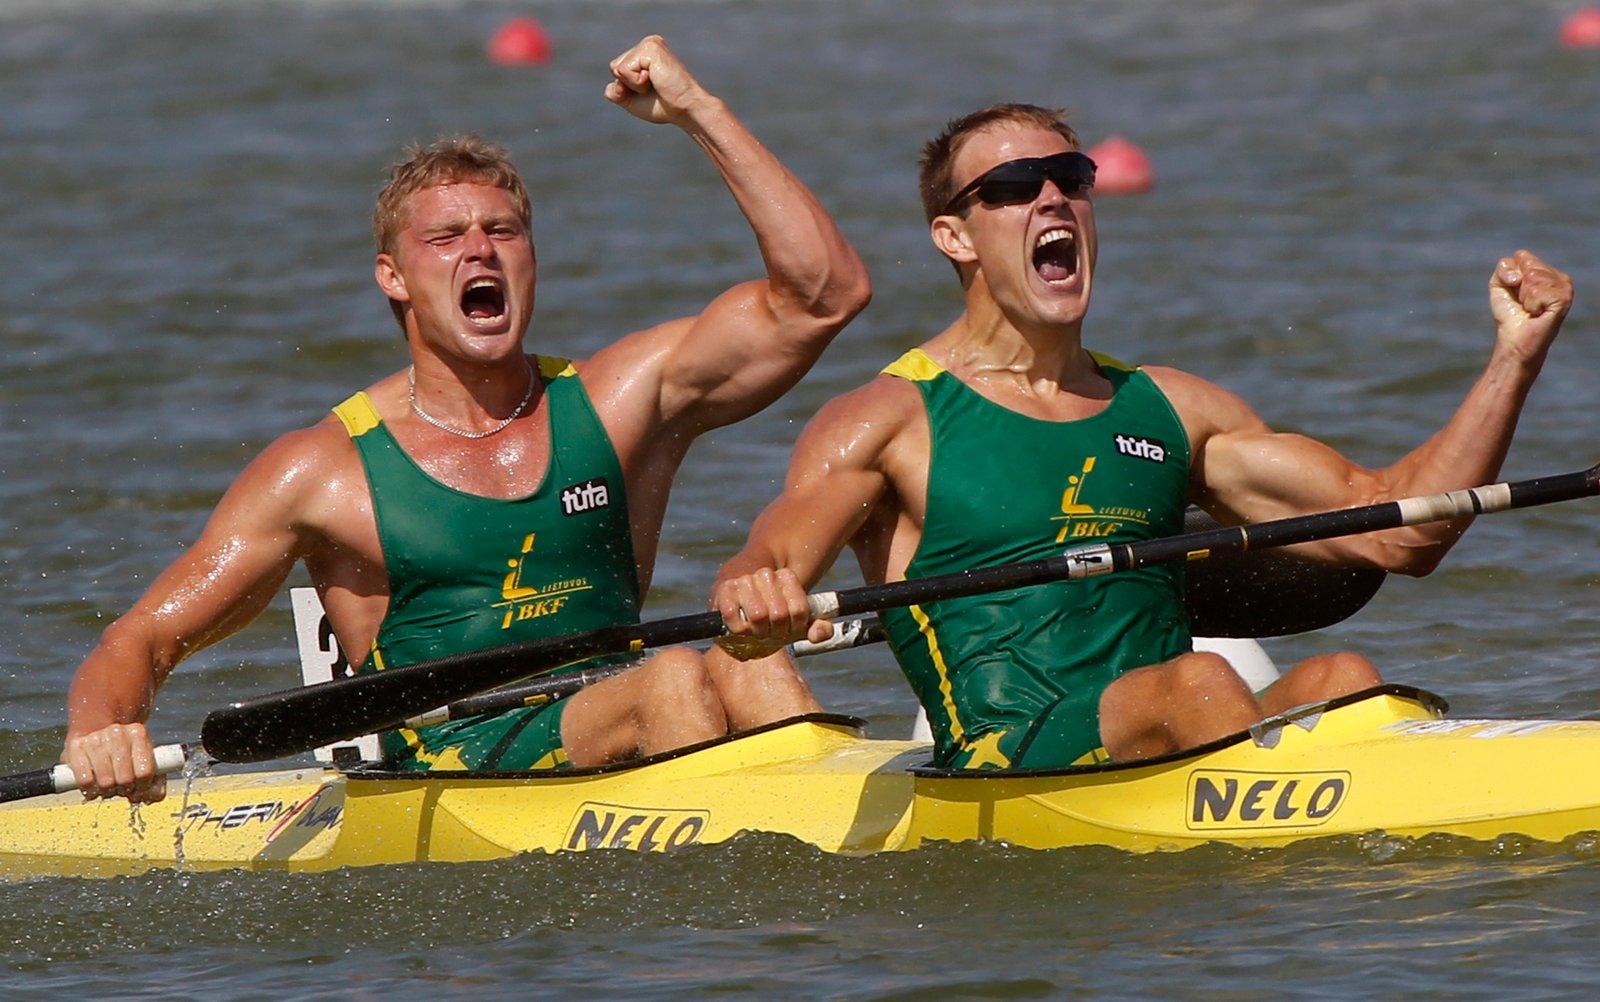 Lithuanian canoe team at 2016 Olympics will be its biggest ever the